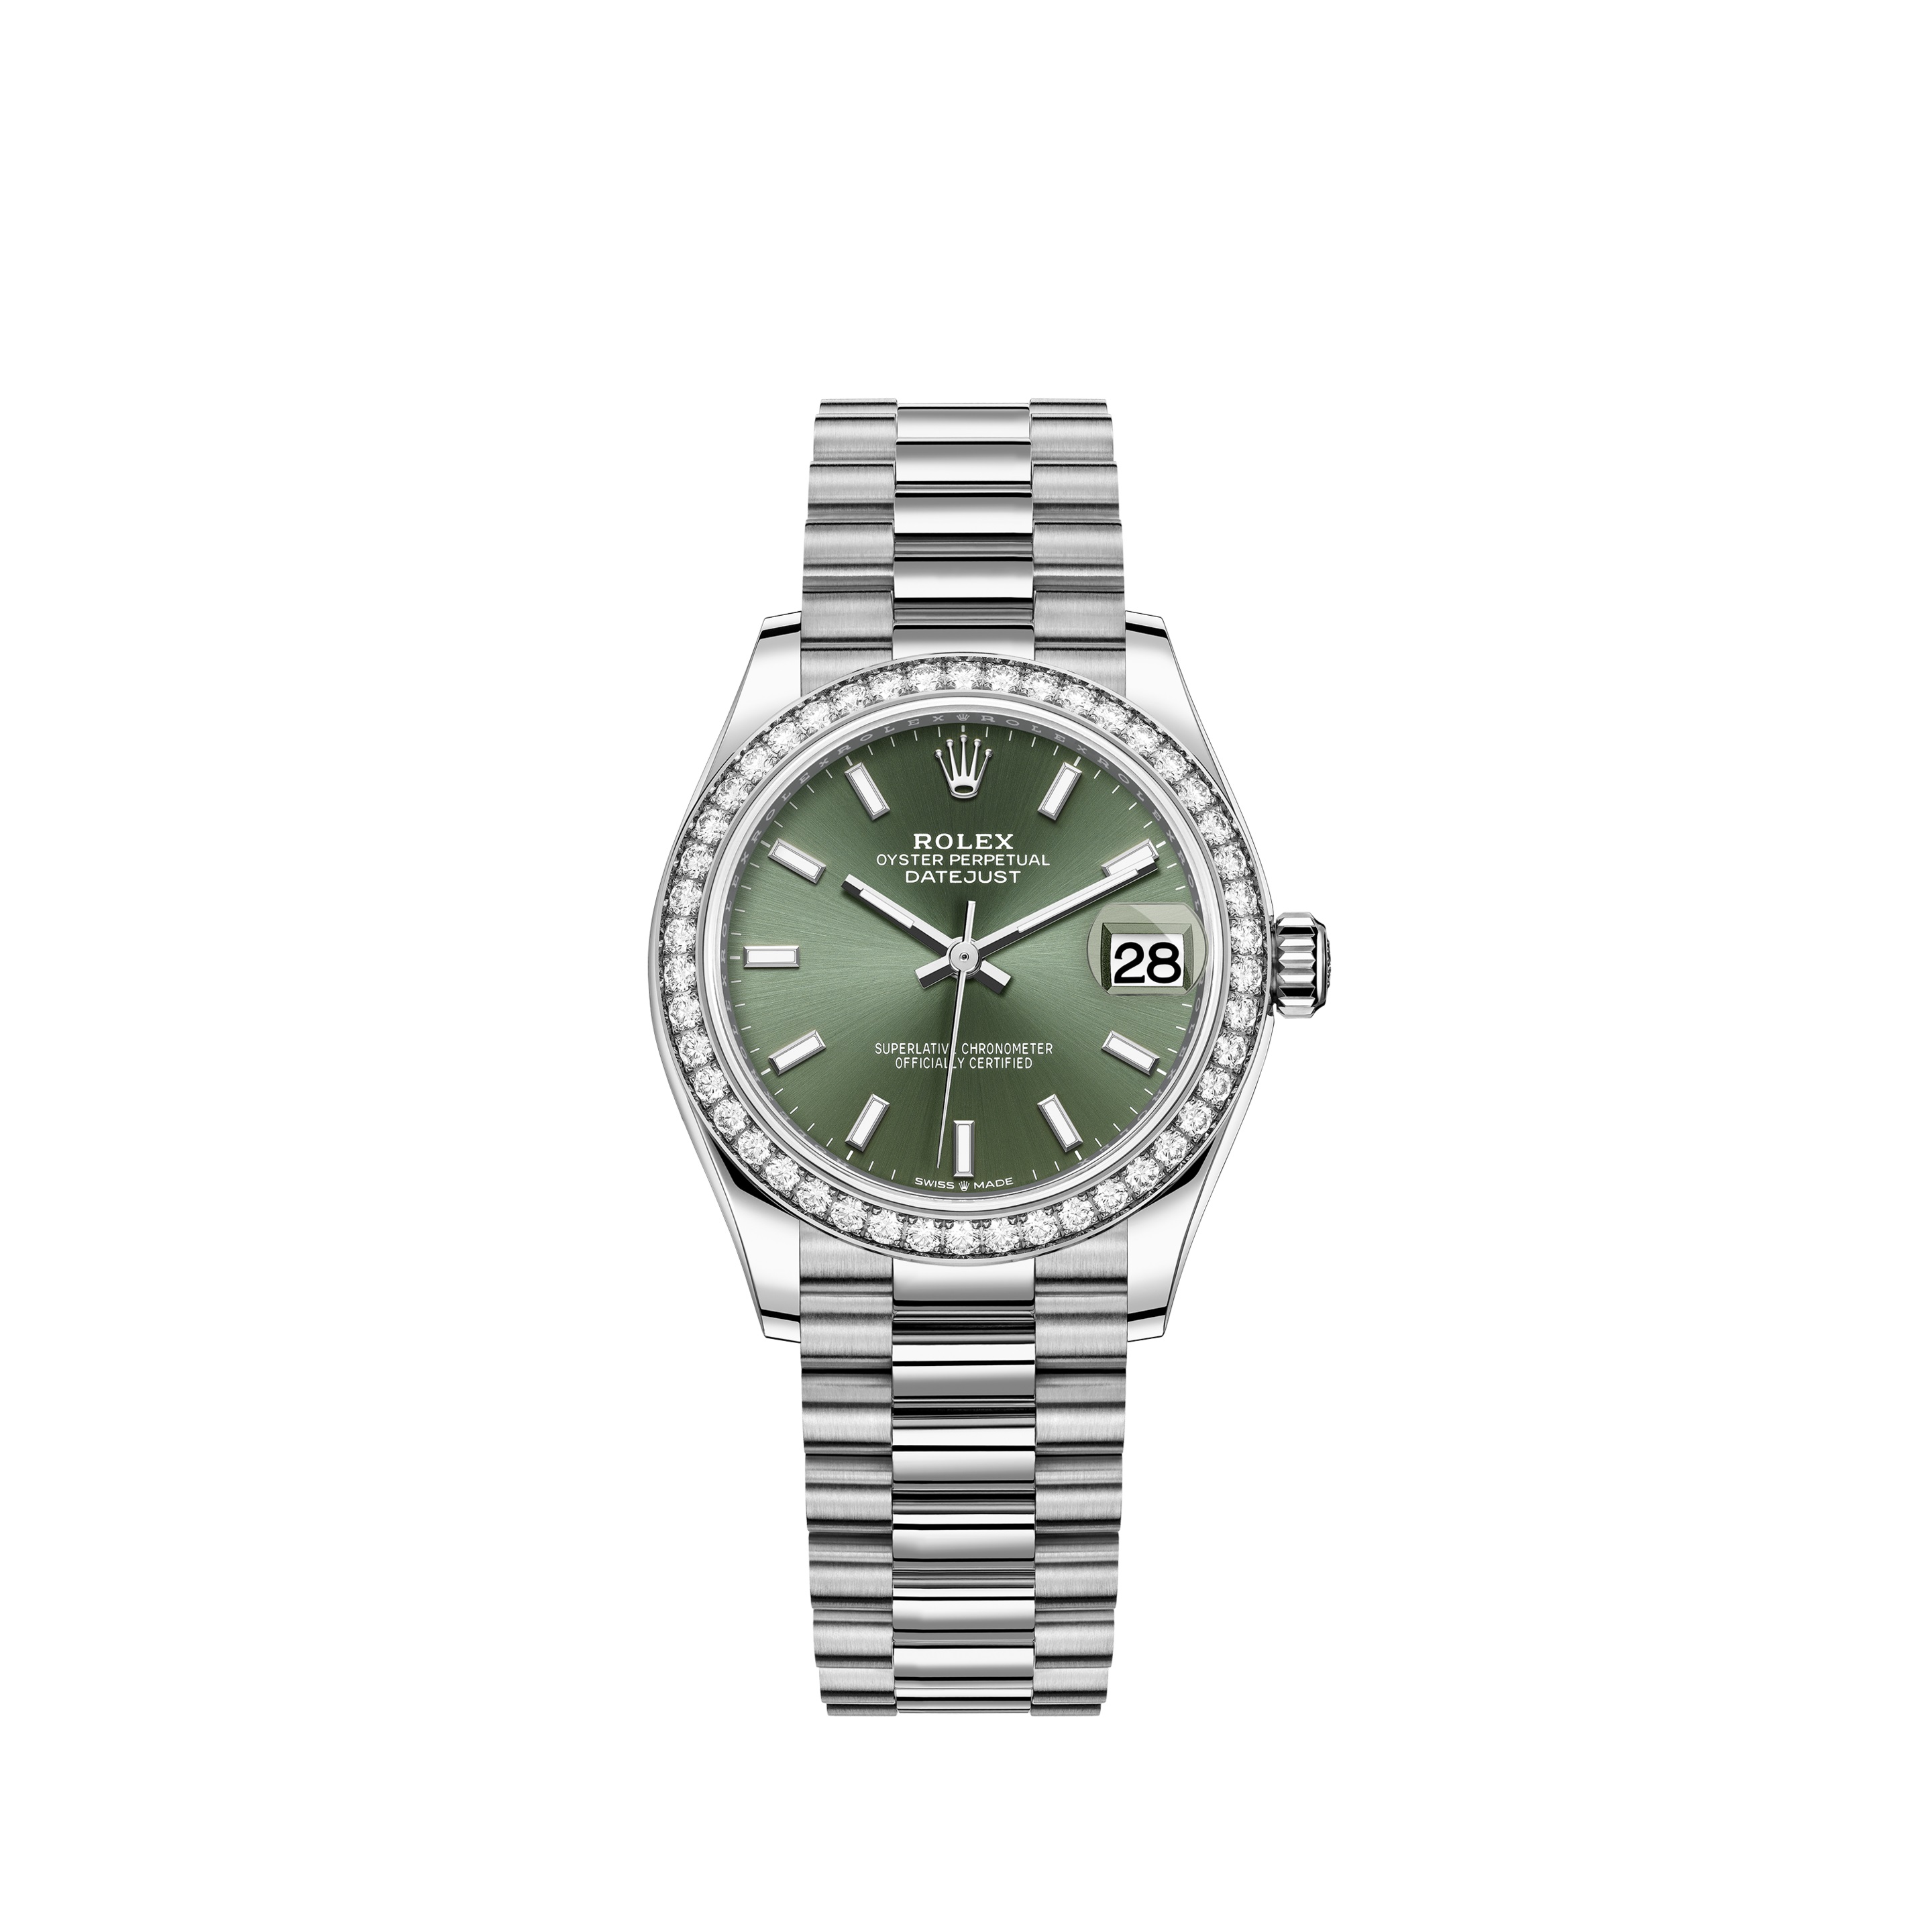 Datejust 31 278289RBR White Gold Watch (Mint Green)